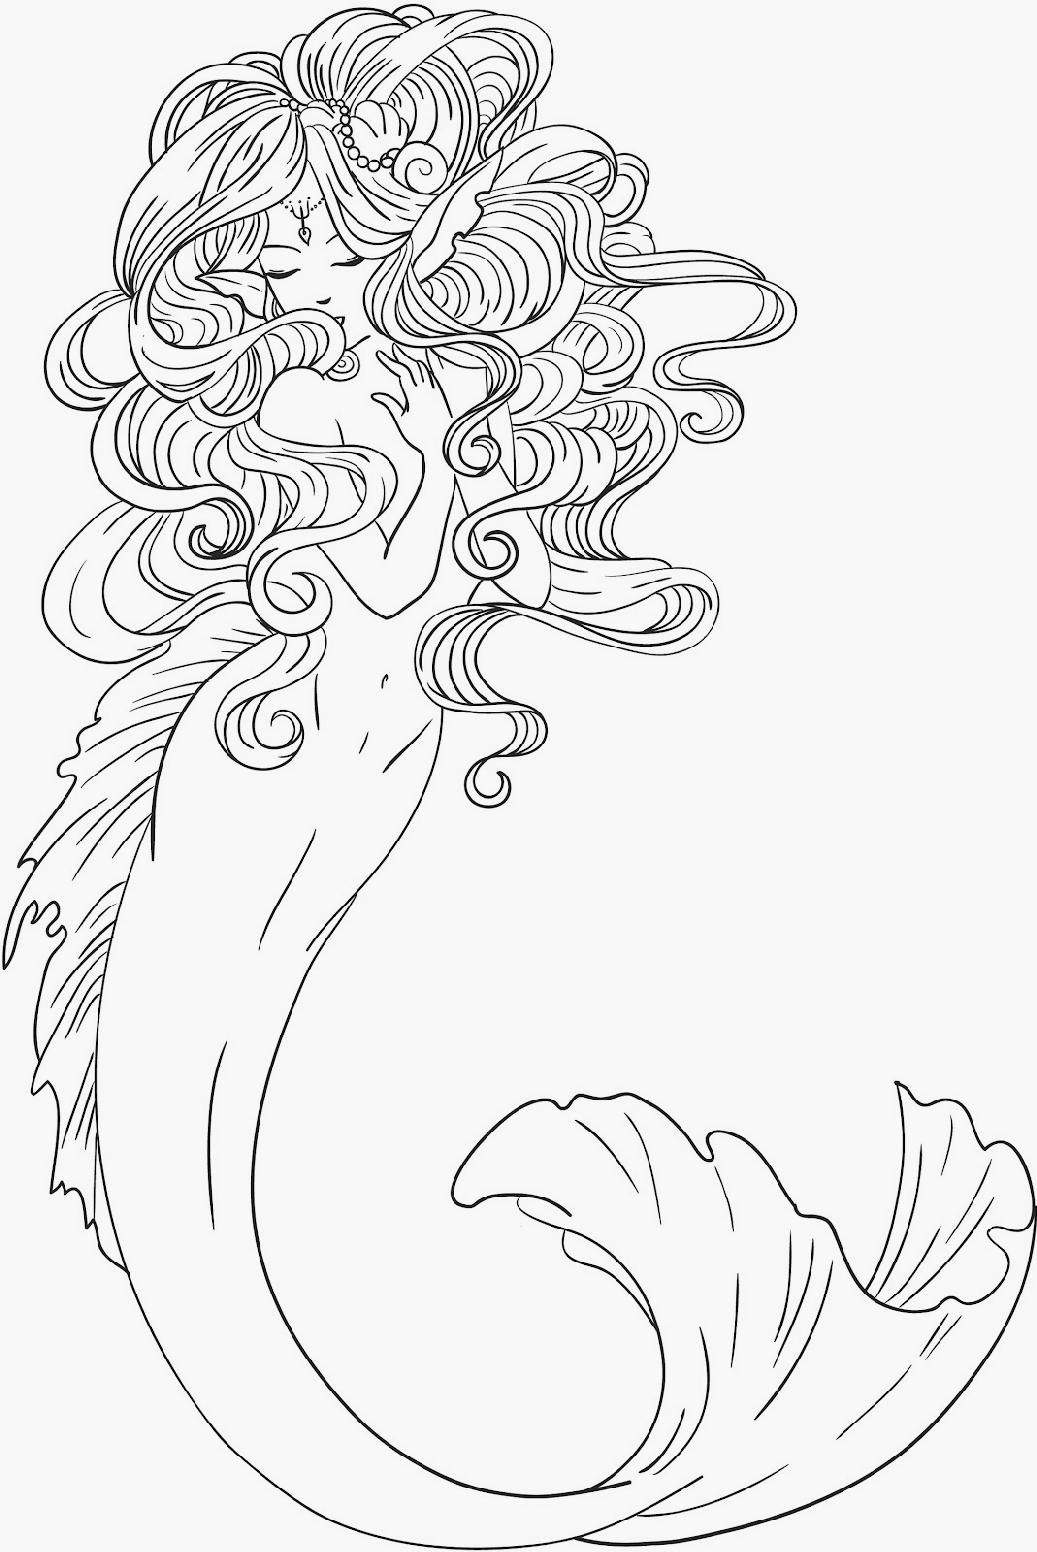 mermaid-coloring-pages-for-adults-clip-art-library